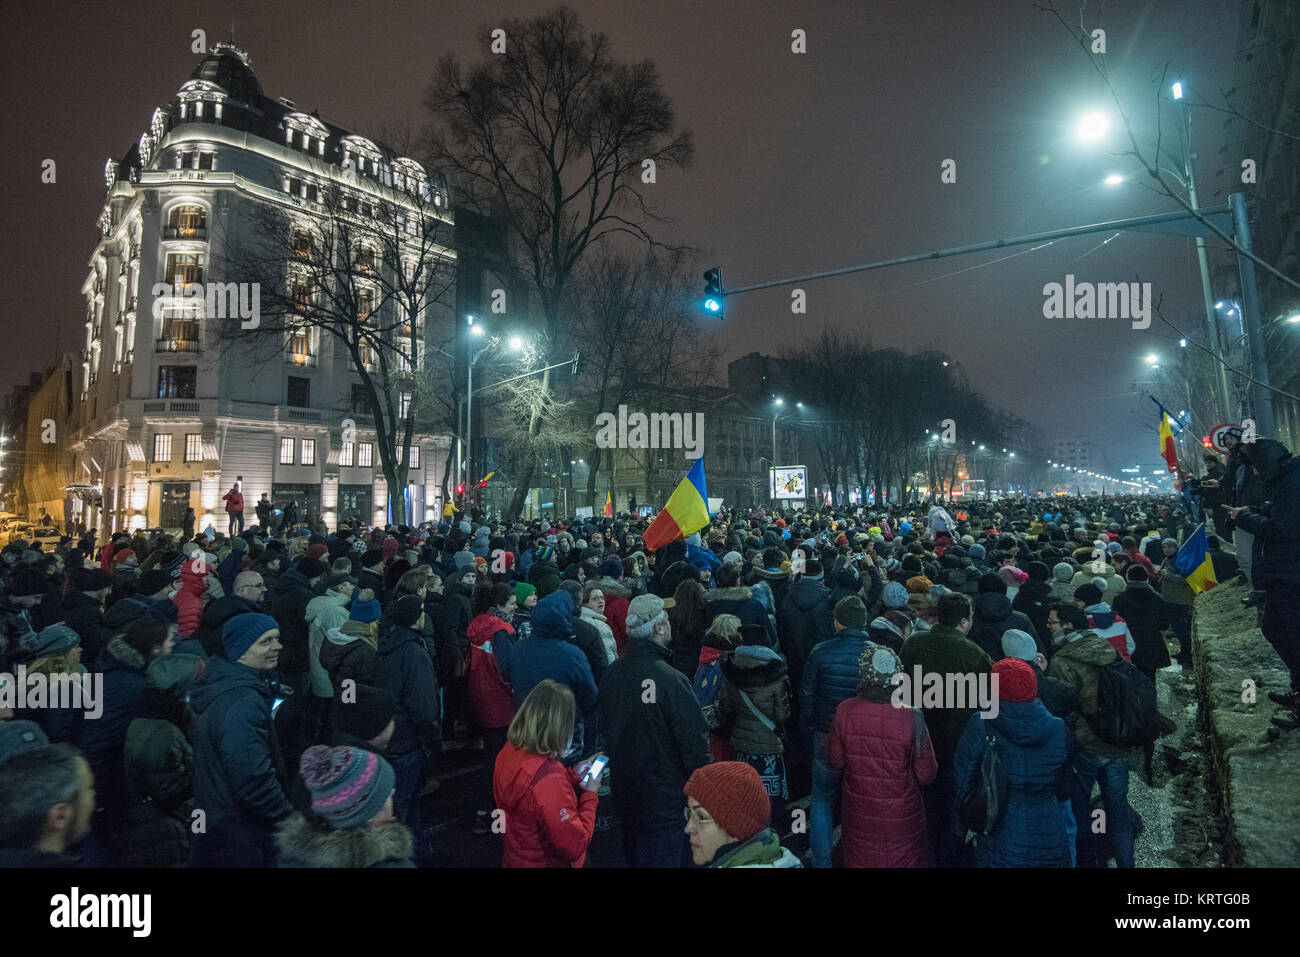 Bucharest, Romania - February 1, 2017: More than 250,000 Romanians demonstrated Wednesday in the biggest anti-corruption protest since 1989. Stock Photo